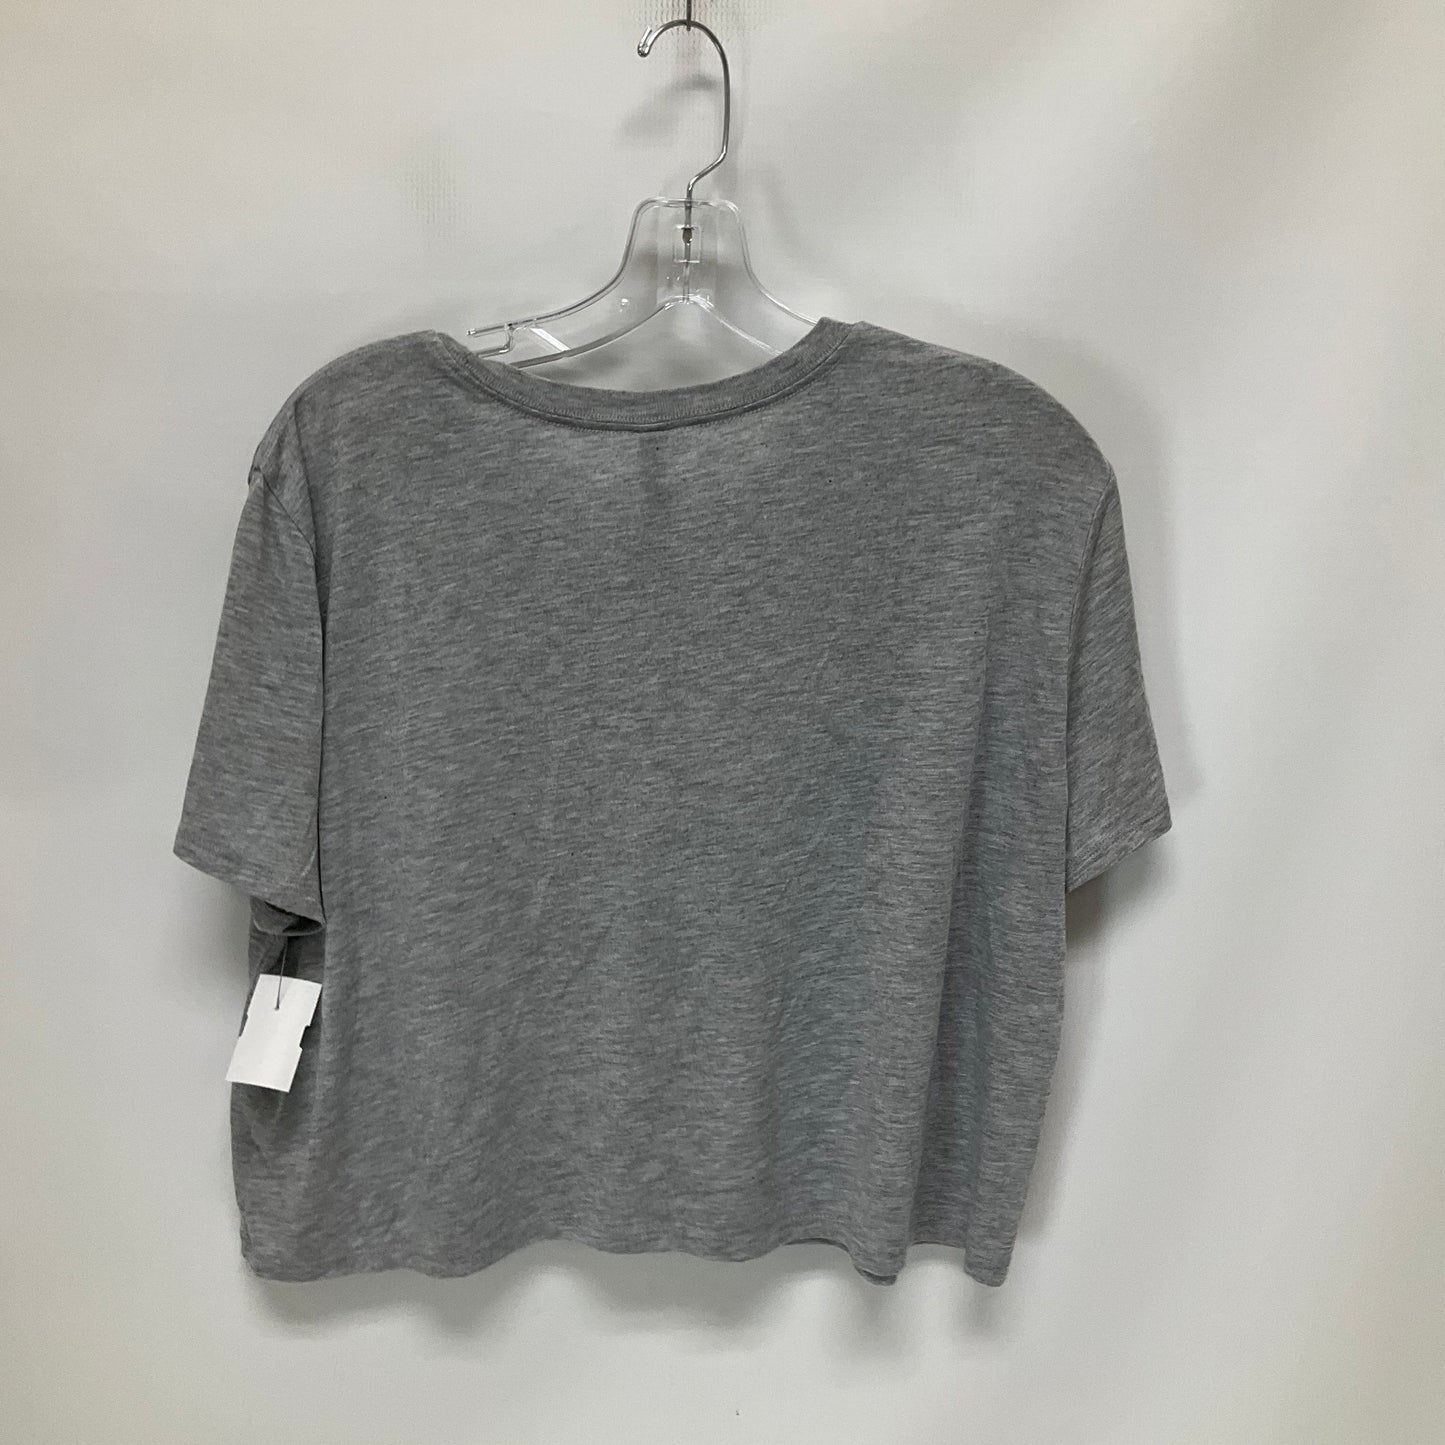 Athletic Top Short Sleeve By Vuori  Size: L